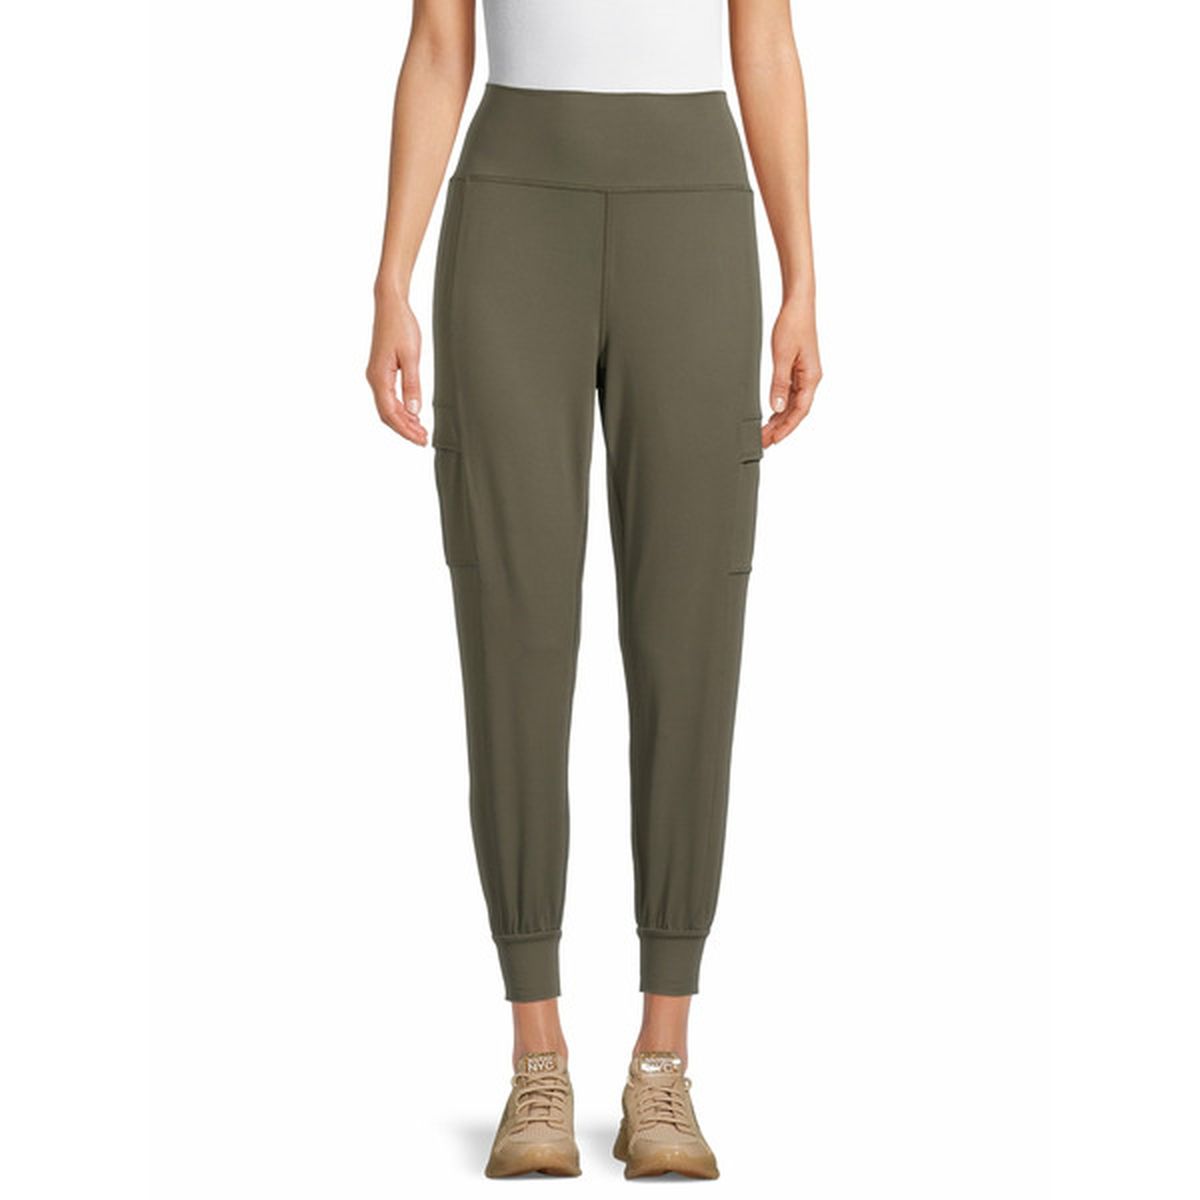 Avia Women's High Rise Yoga Leggings with Side Cargo Pockets - Faded Green  (each) Delivery or Pickup Near Me - Instacart